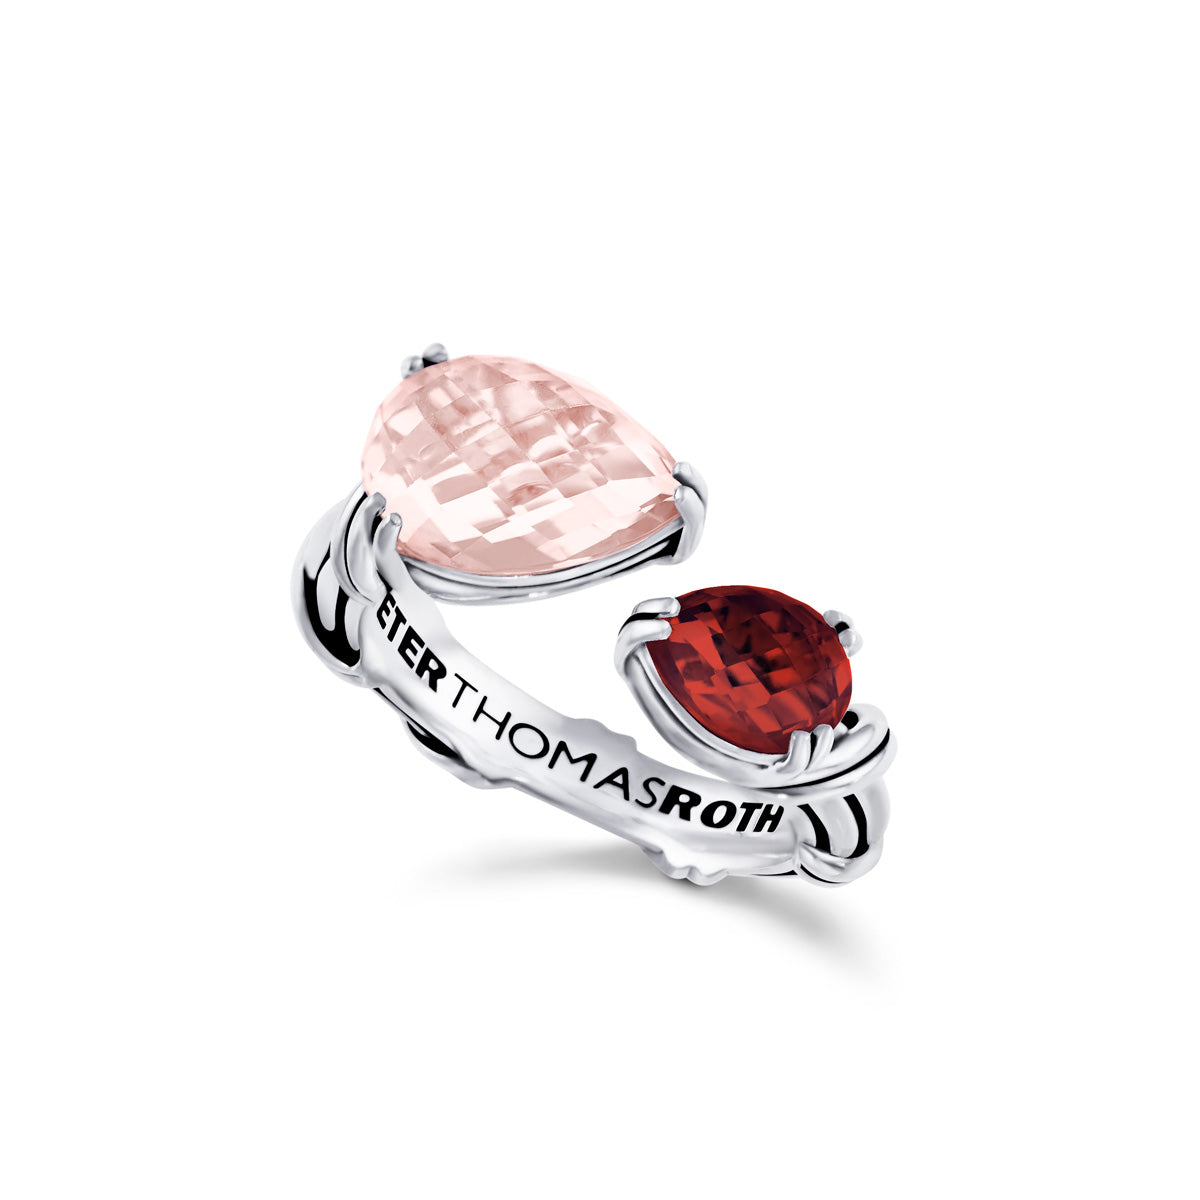 Fantasies Pear Bypass Ring in sterling silver with rose quartz and garnet